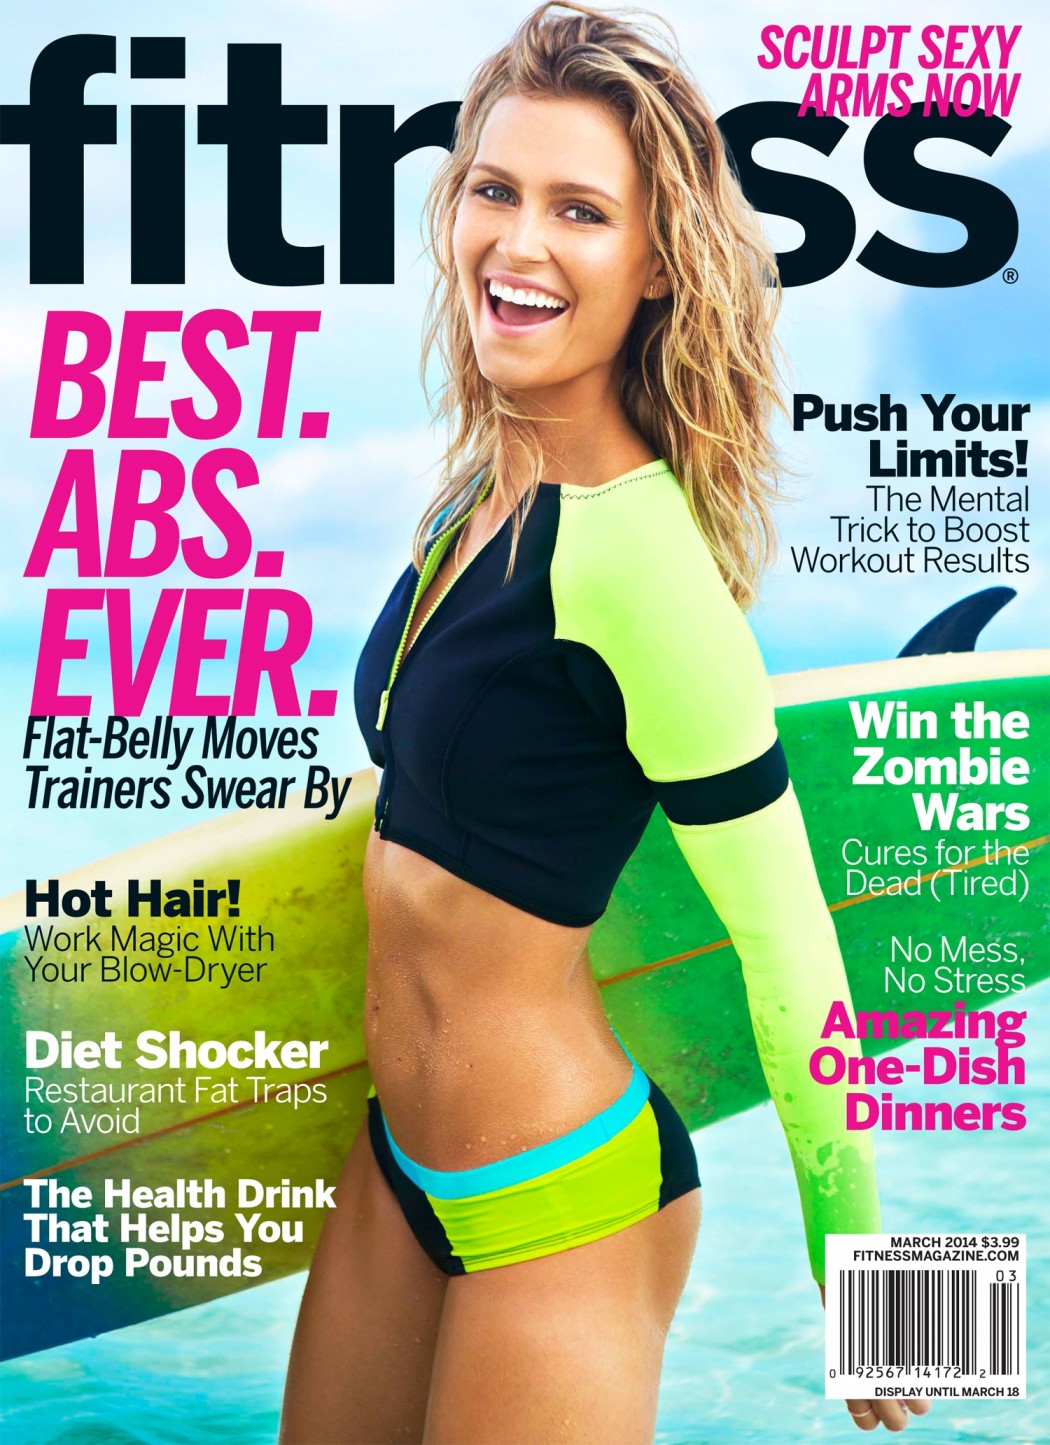 Featured in Women's Fitness Magazine October Issue - Stress